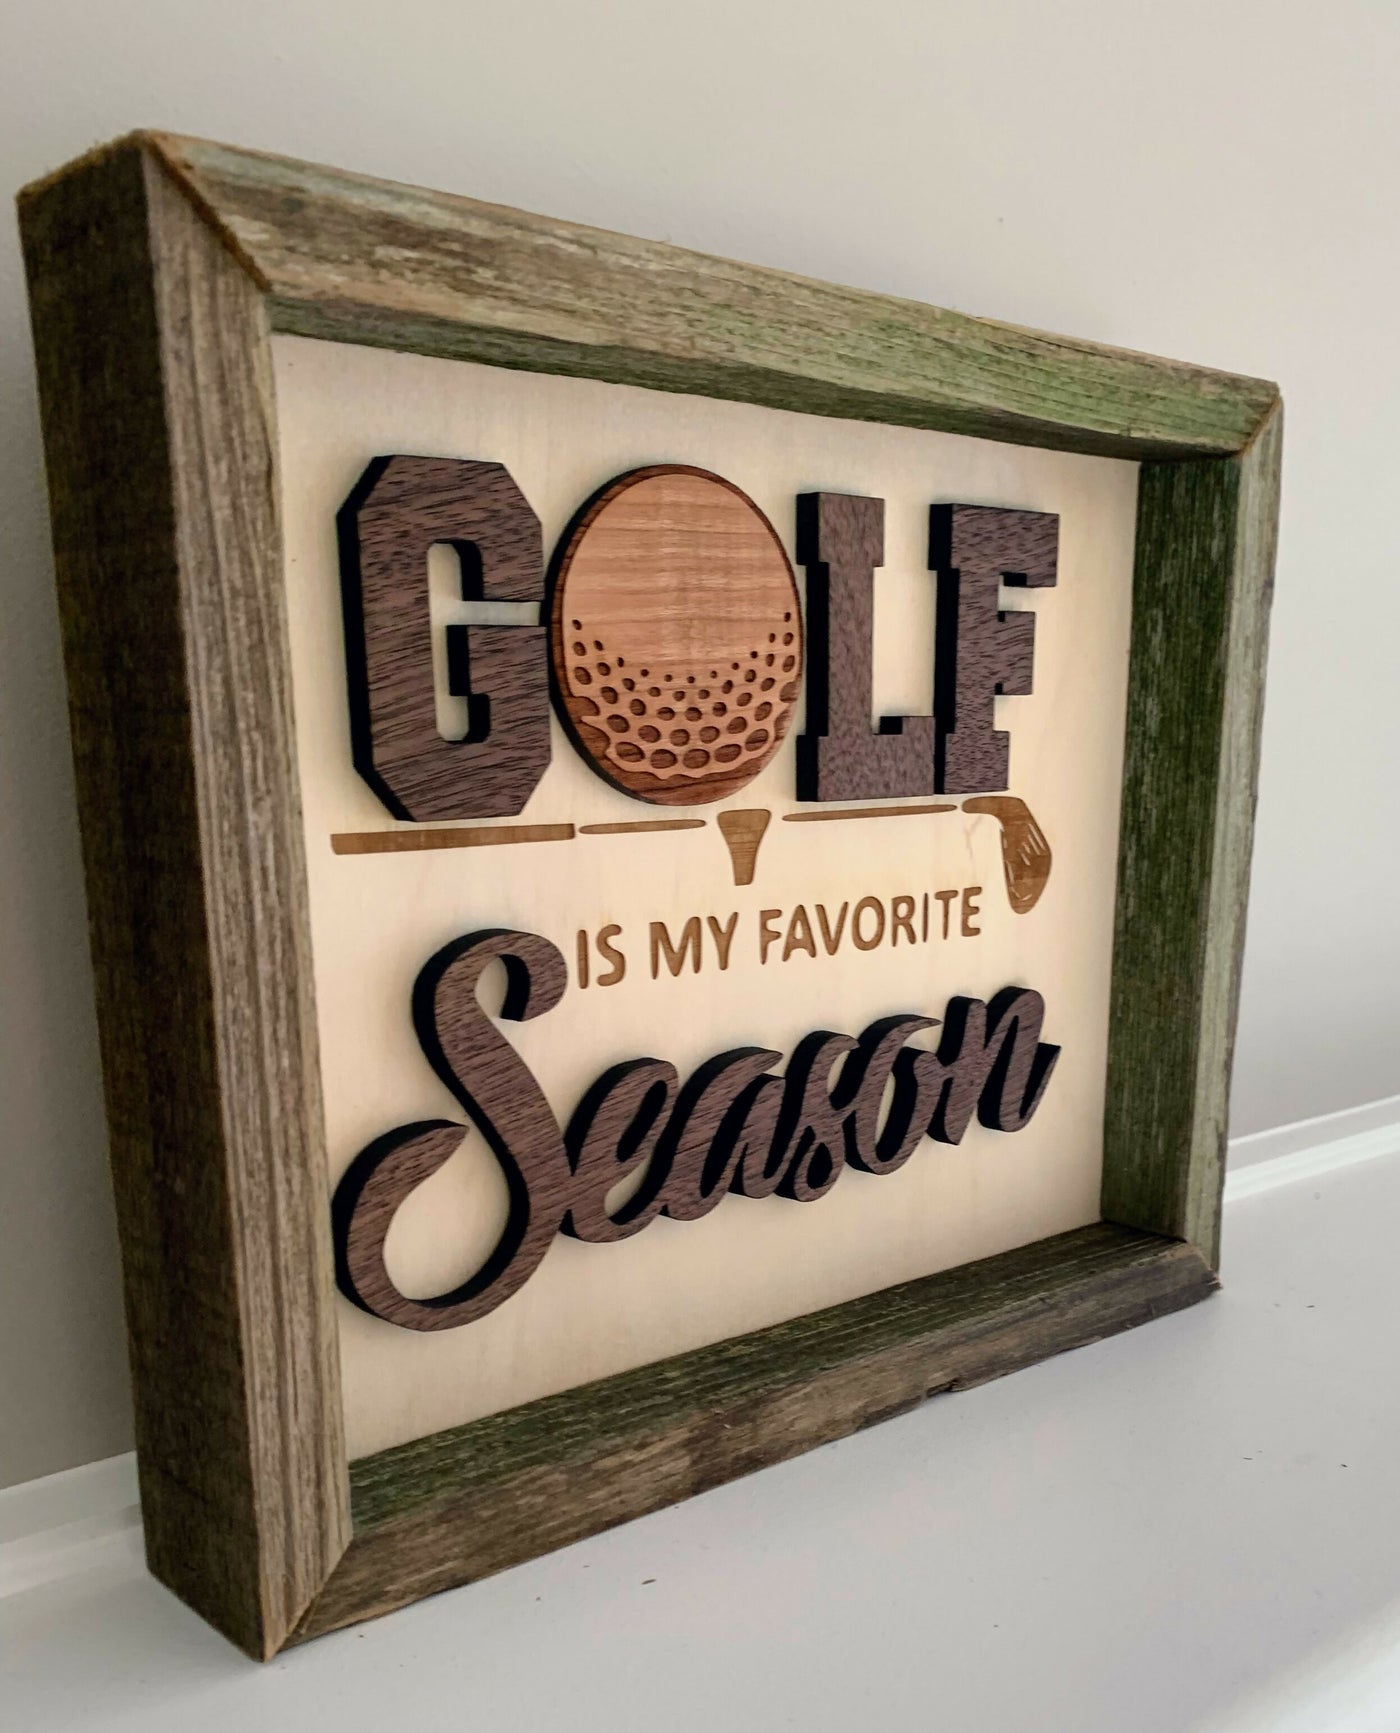 Golf is My favourite Season Laser Engraved Wooden Sign